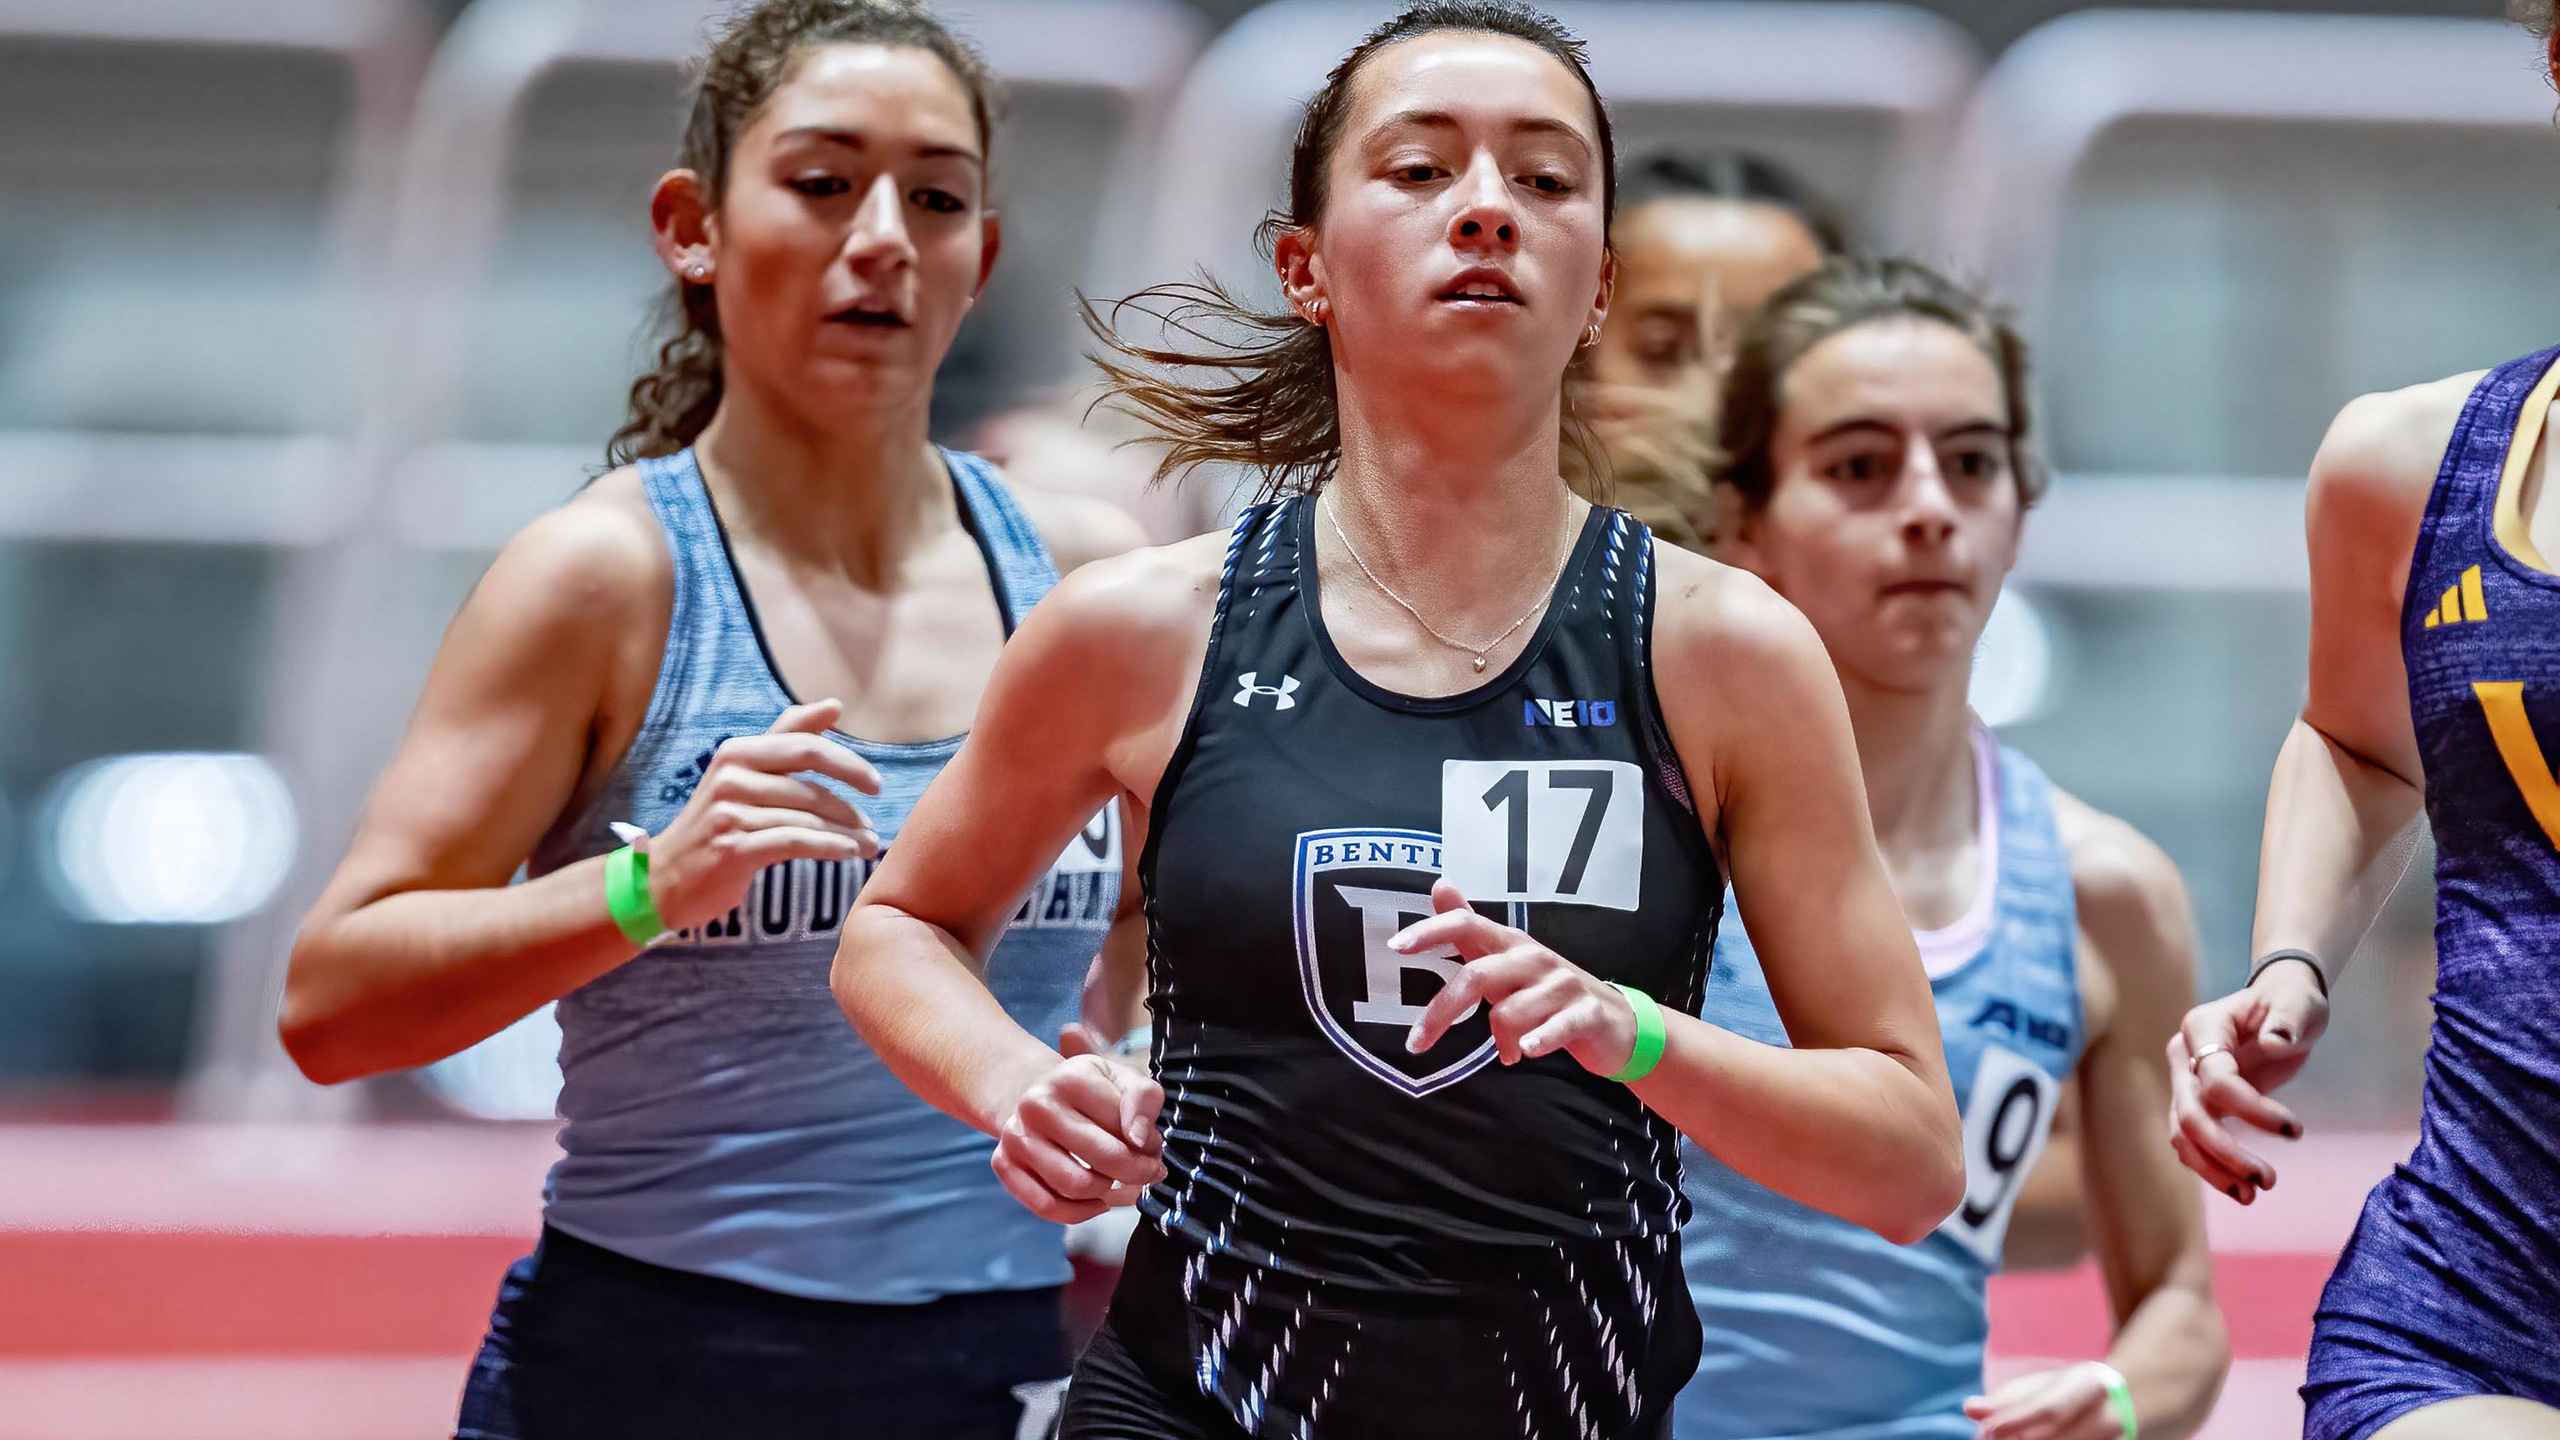 Burmester Runs Personal Best in the Mile at Valentine Invitational